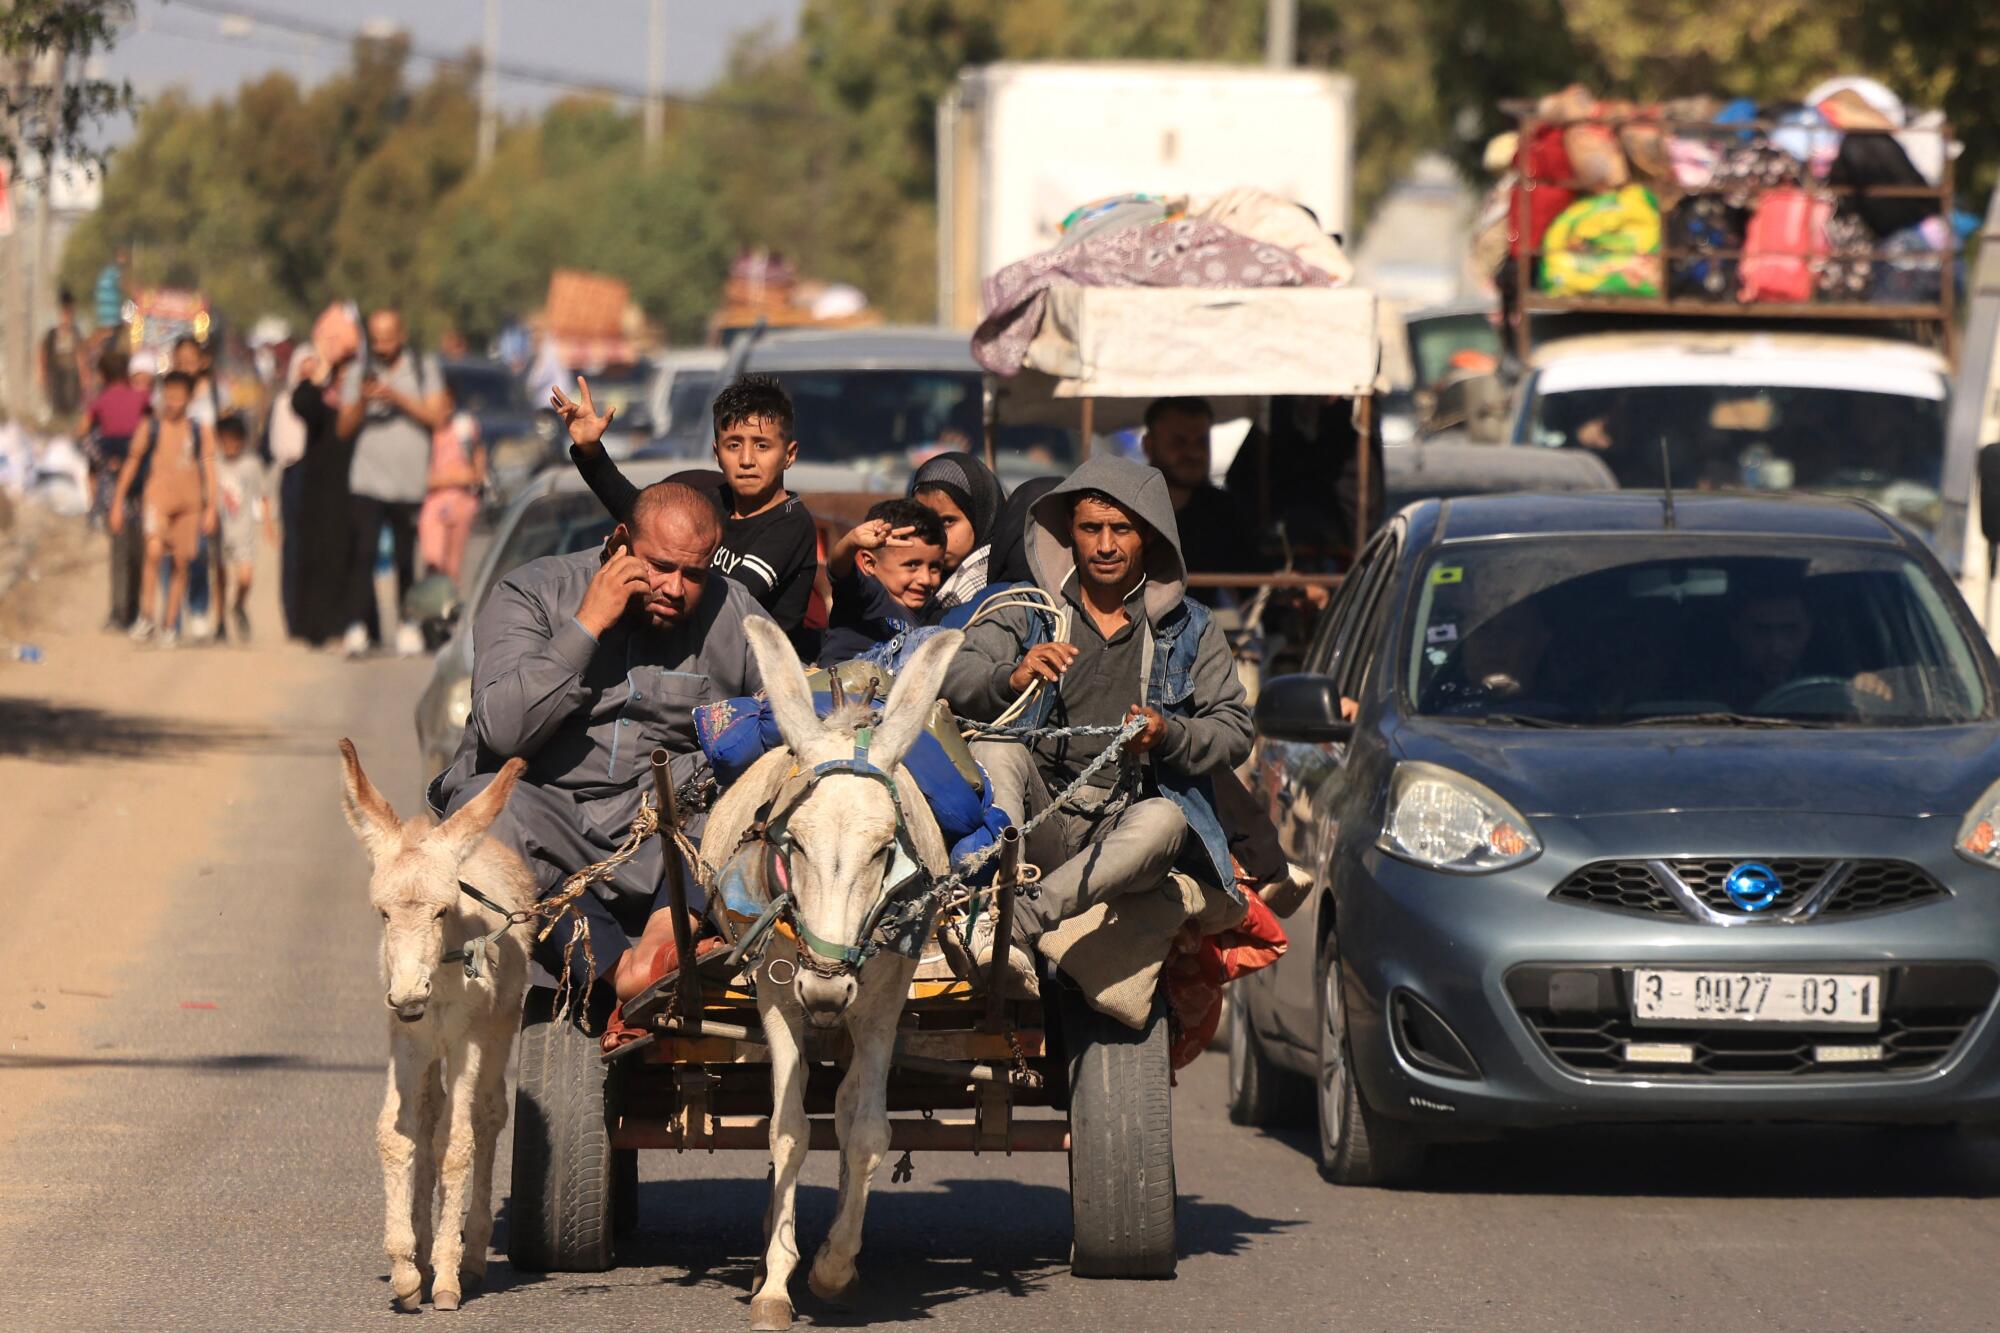 A family in a donkey-drawn cart joins cars, trucks and people on foot, all heading in the same direction on a dusty roadway